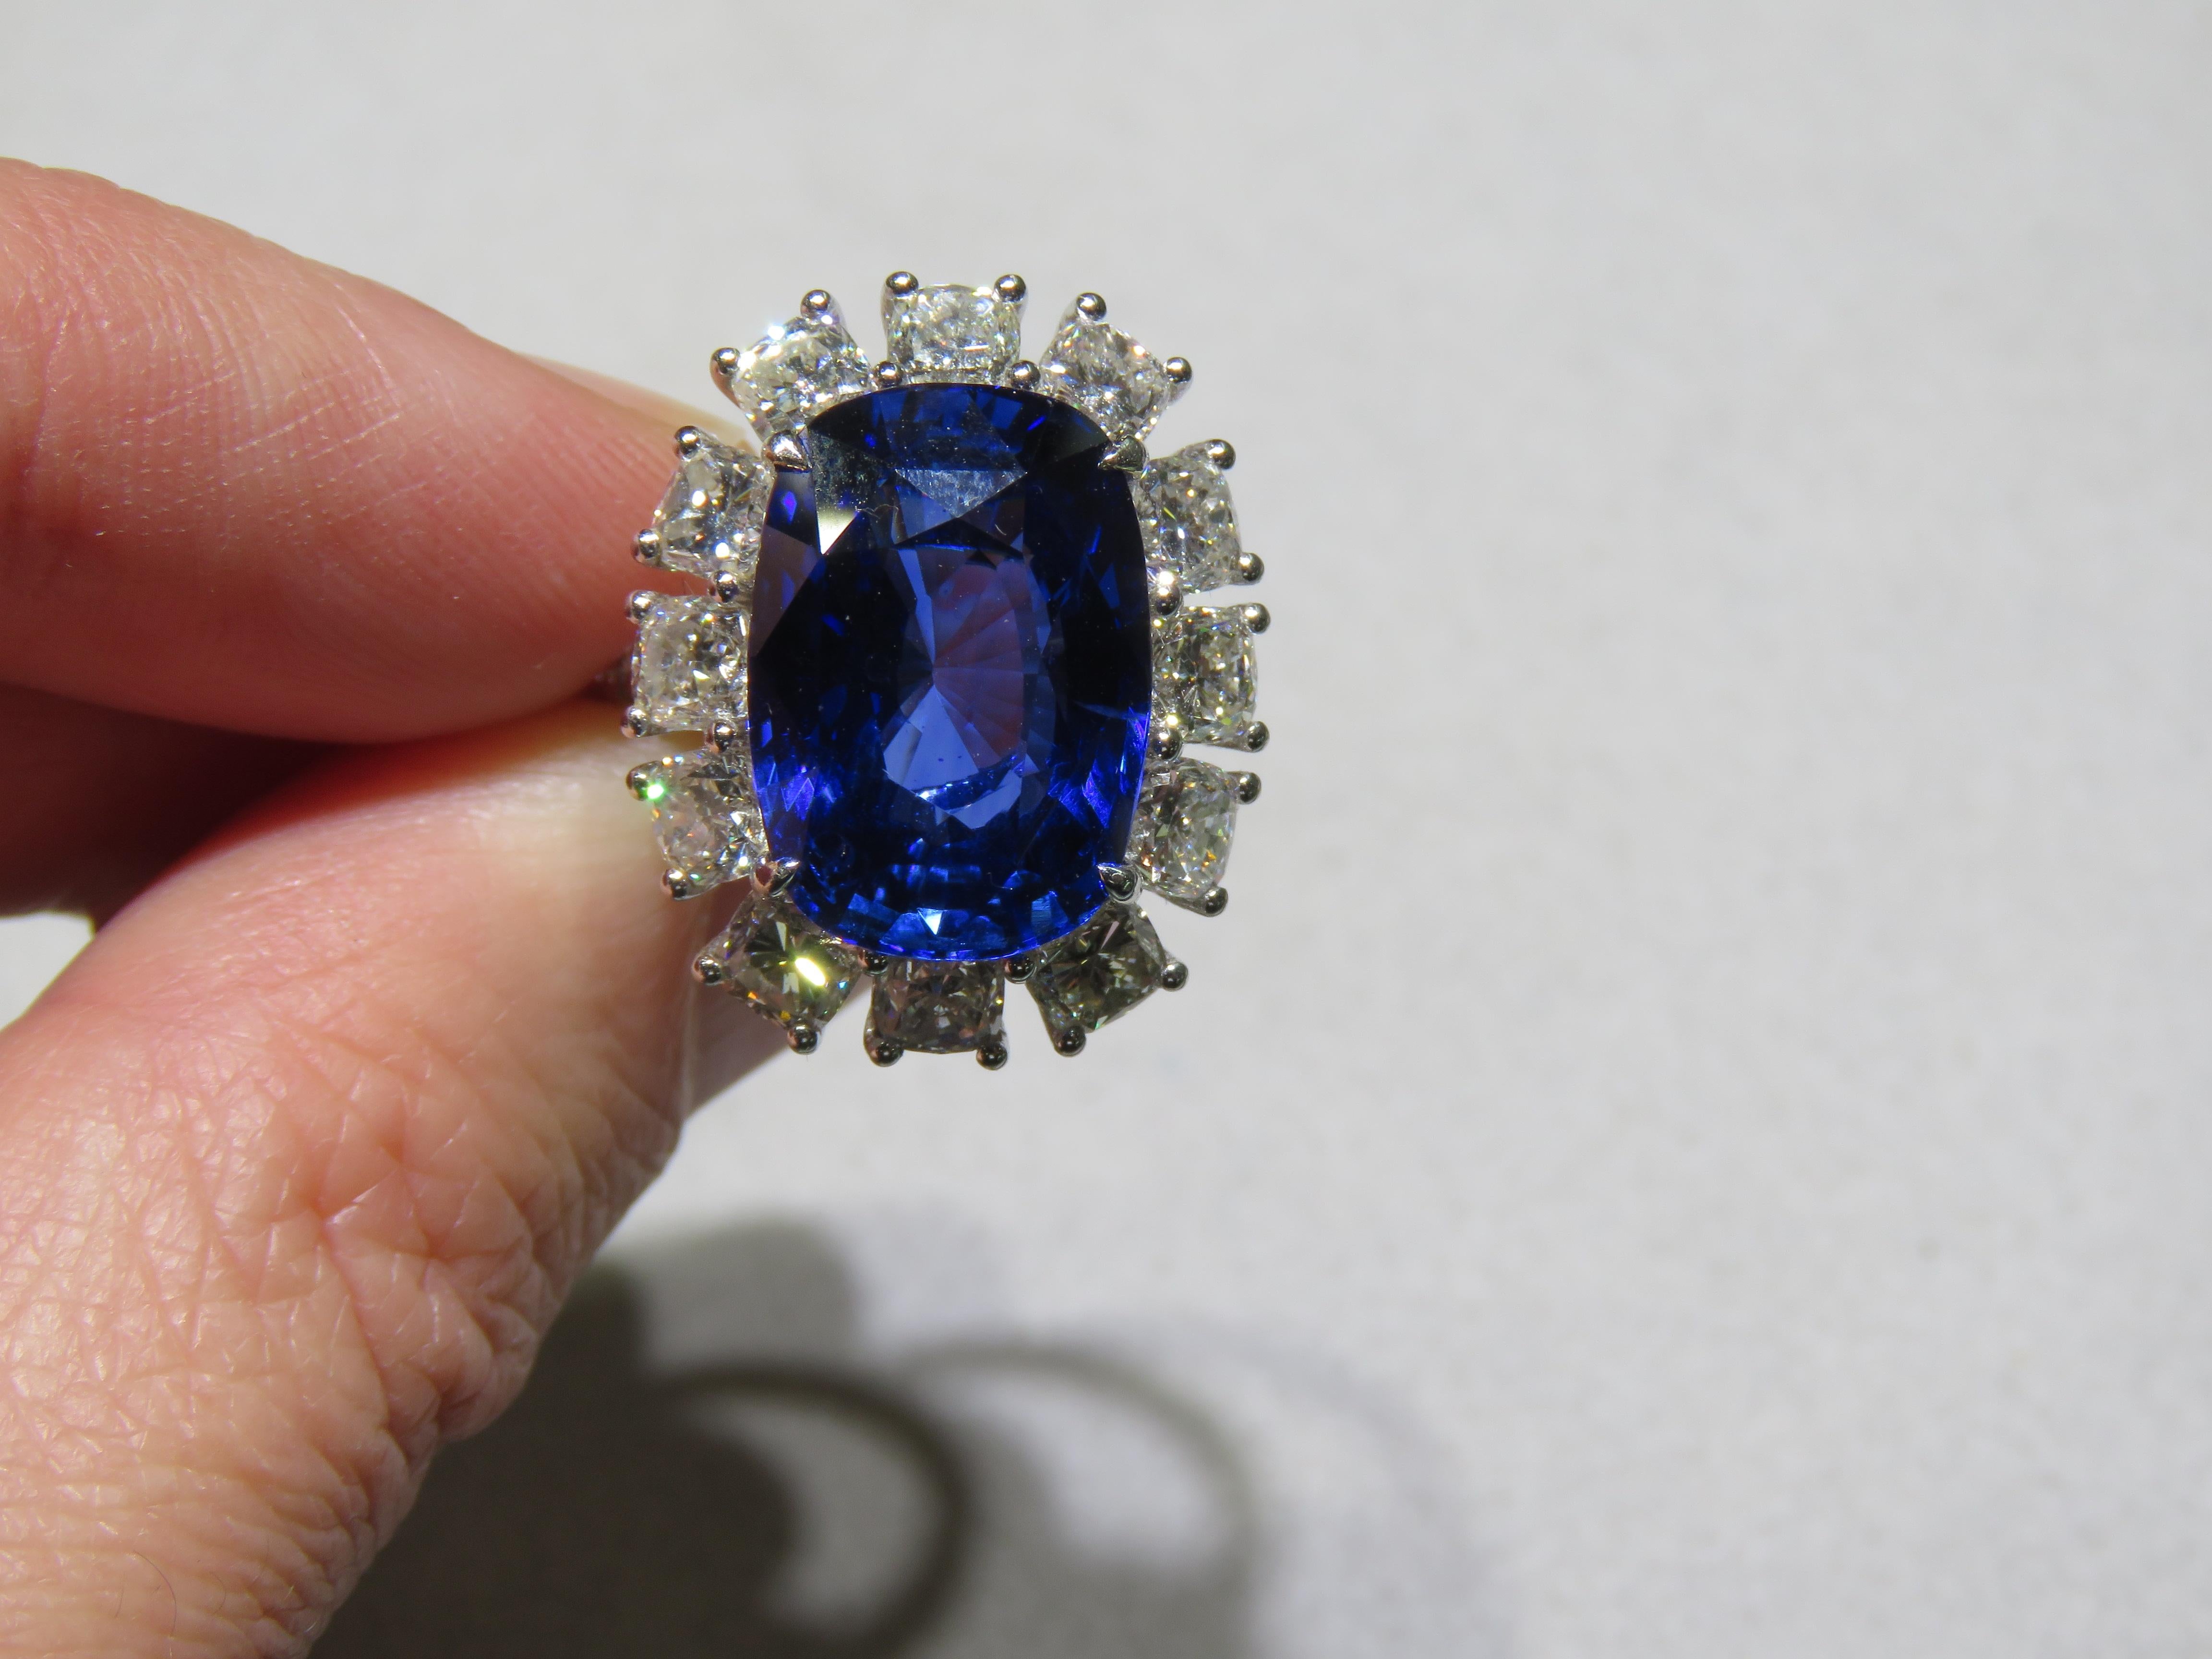 The Following Item we are offering is a Rare Important Spectacular and Brilliant 18KT Gold Large Gorgeous Sapphire Diamond Ring. Ring consists of a Rare Fine Magnificent Rare Natural Ceylon Blue Sapphire surrounded with Glittering Diamonds. T.C.W.